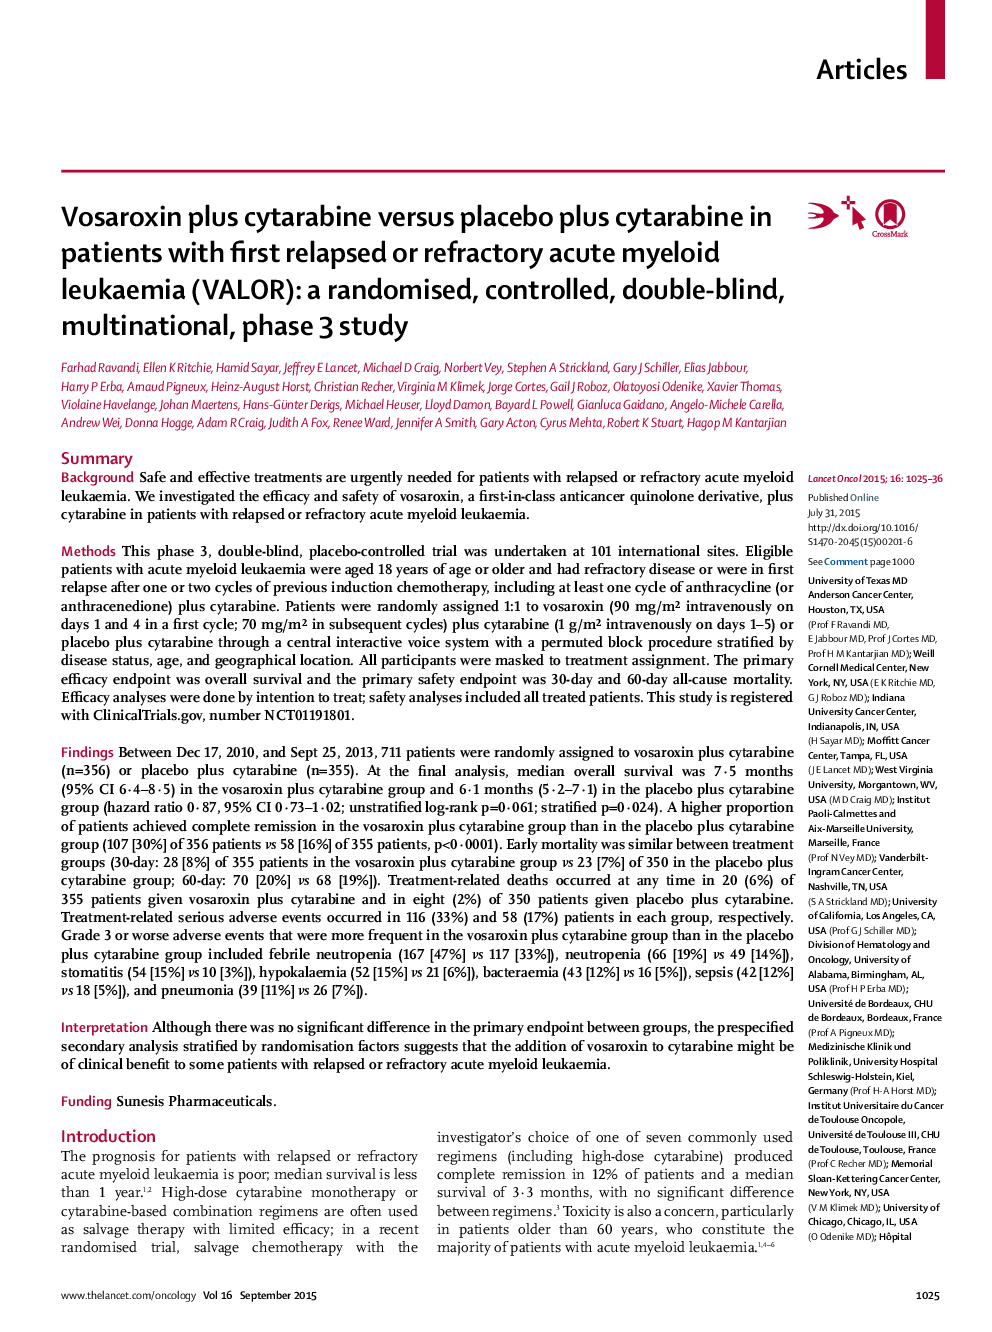 Vosaroxin plus cytarabine versus placebo plus cytarabine in patients with first relapsed or refractory acute myeloid leukaemia (VALOR): a randomised, controlled, double-blind, multinational, phase 3 study